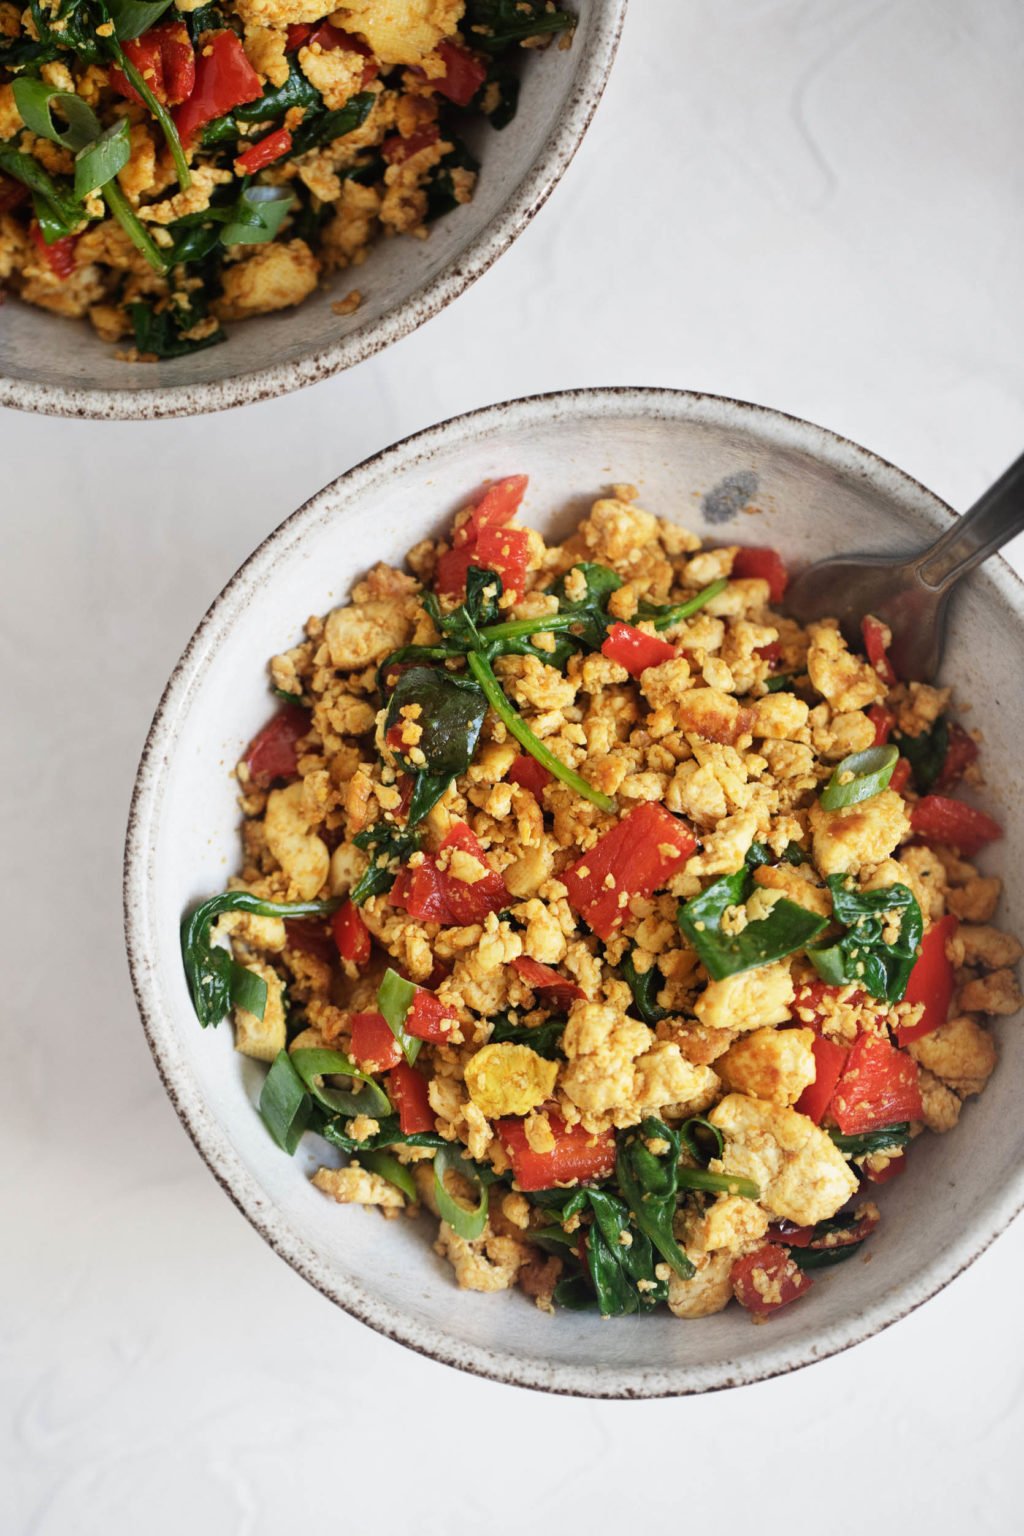 Two bowls of vegan classic tofu scramble, full of fresh vegetables and greens, ready to be served.